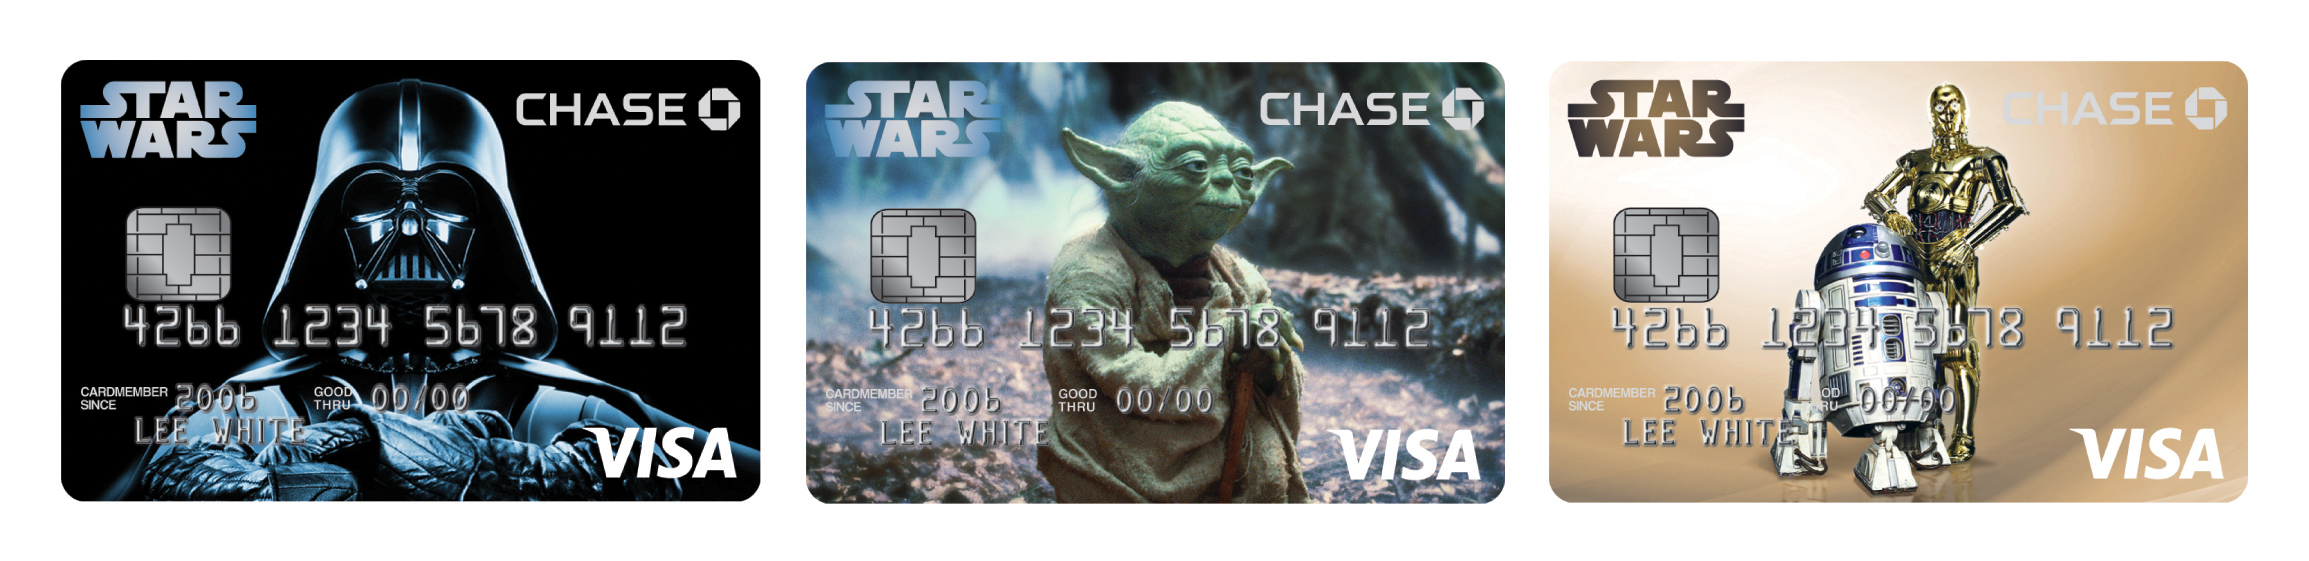 Adding Multimedia Star Warstm Comes To Chase Disney Visa Credit Cards Business Wire